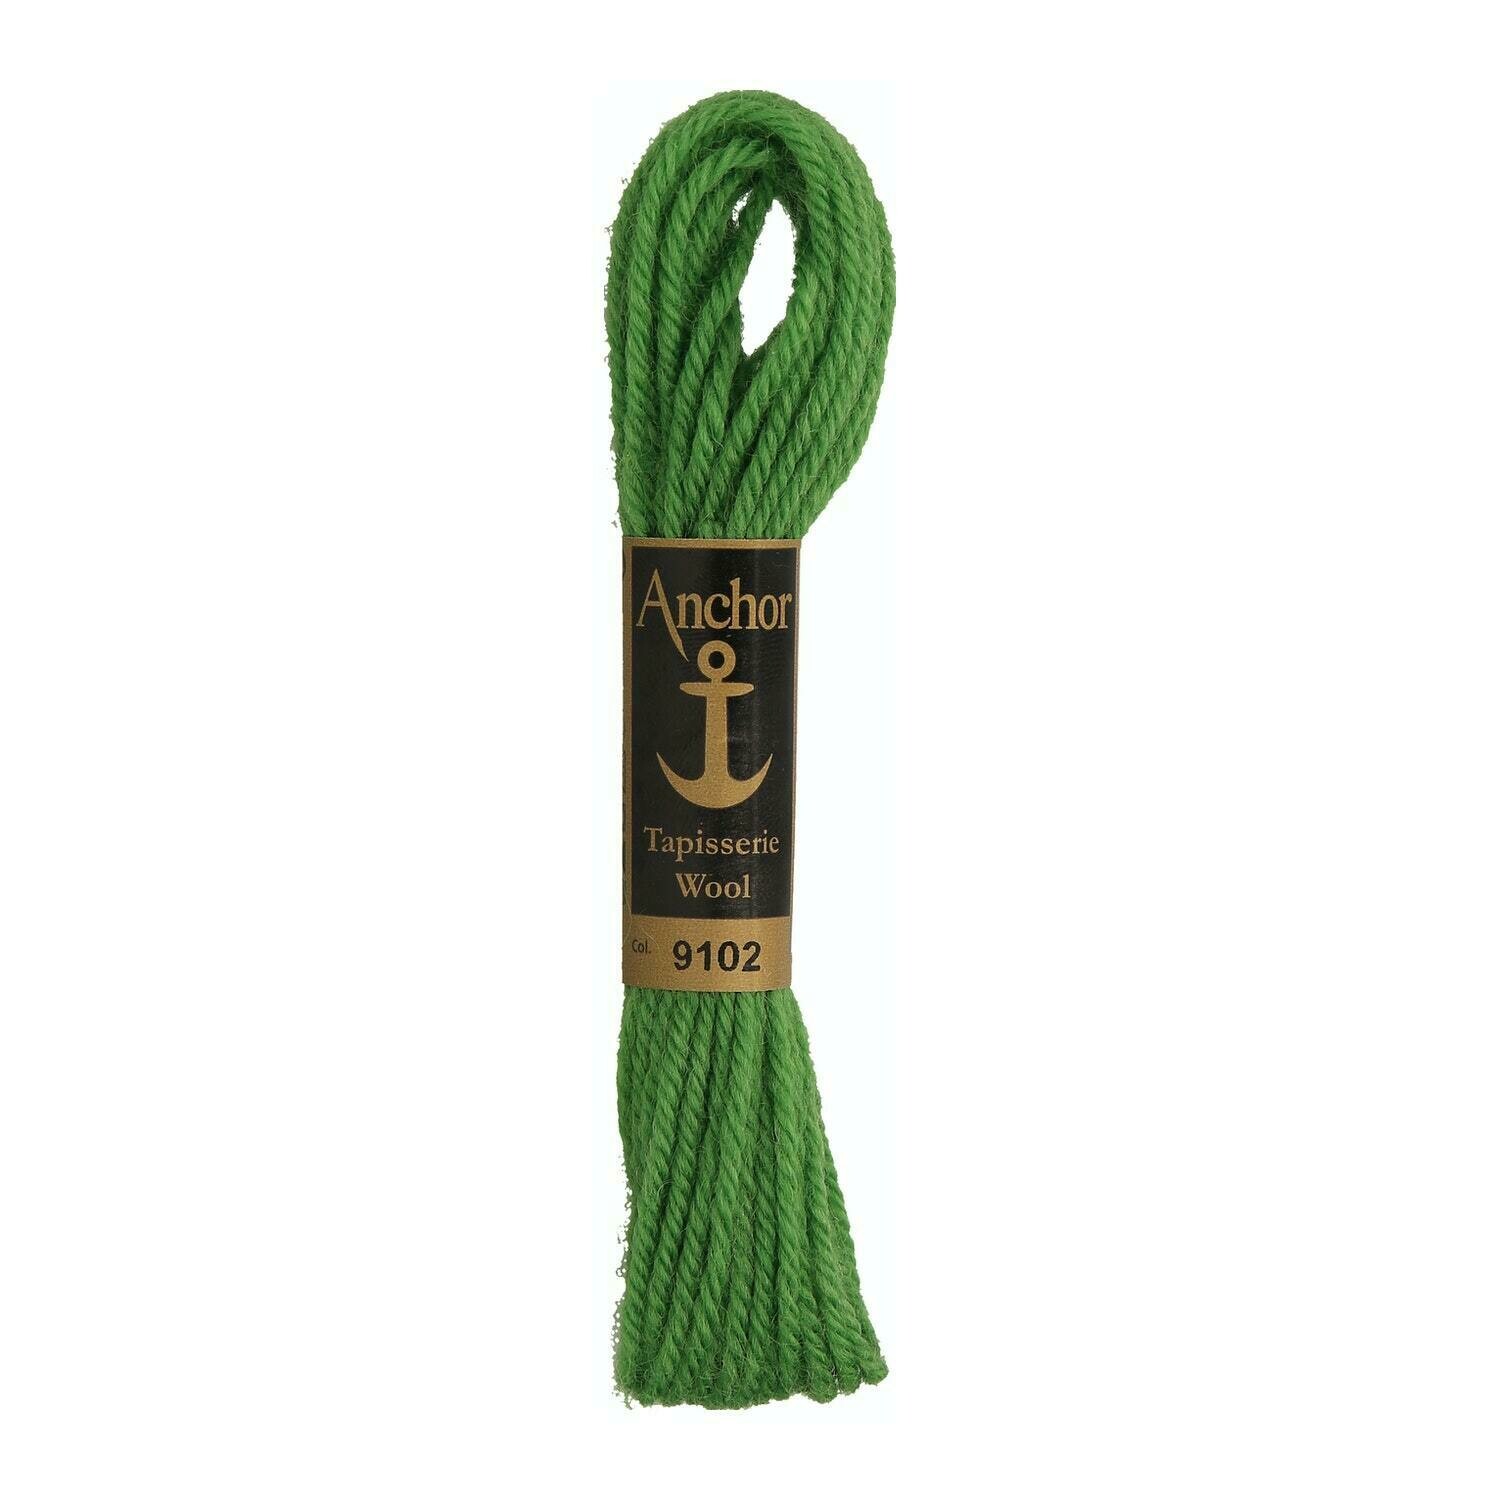 Anchor Tapisserie Wool #09102